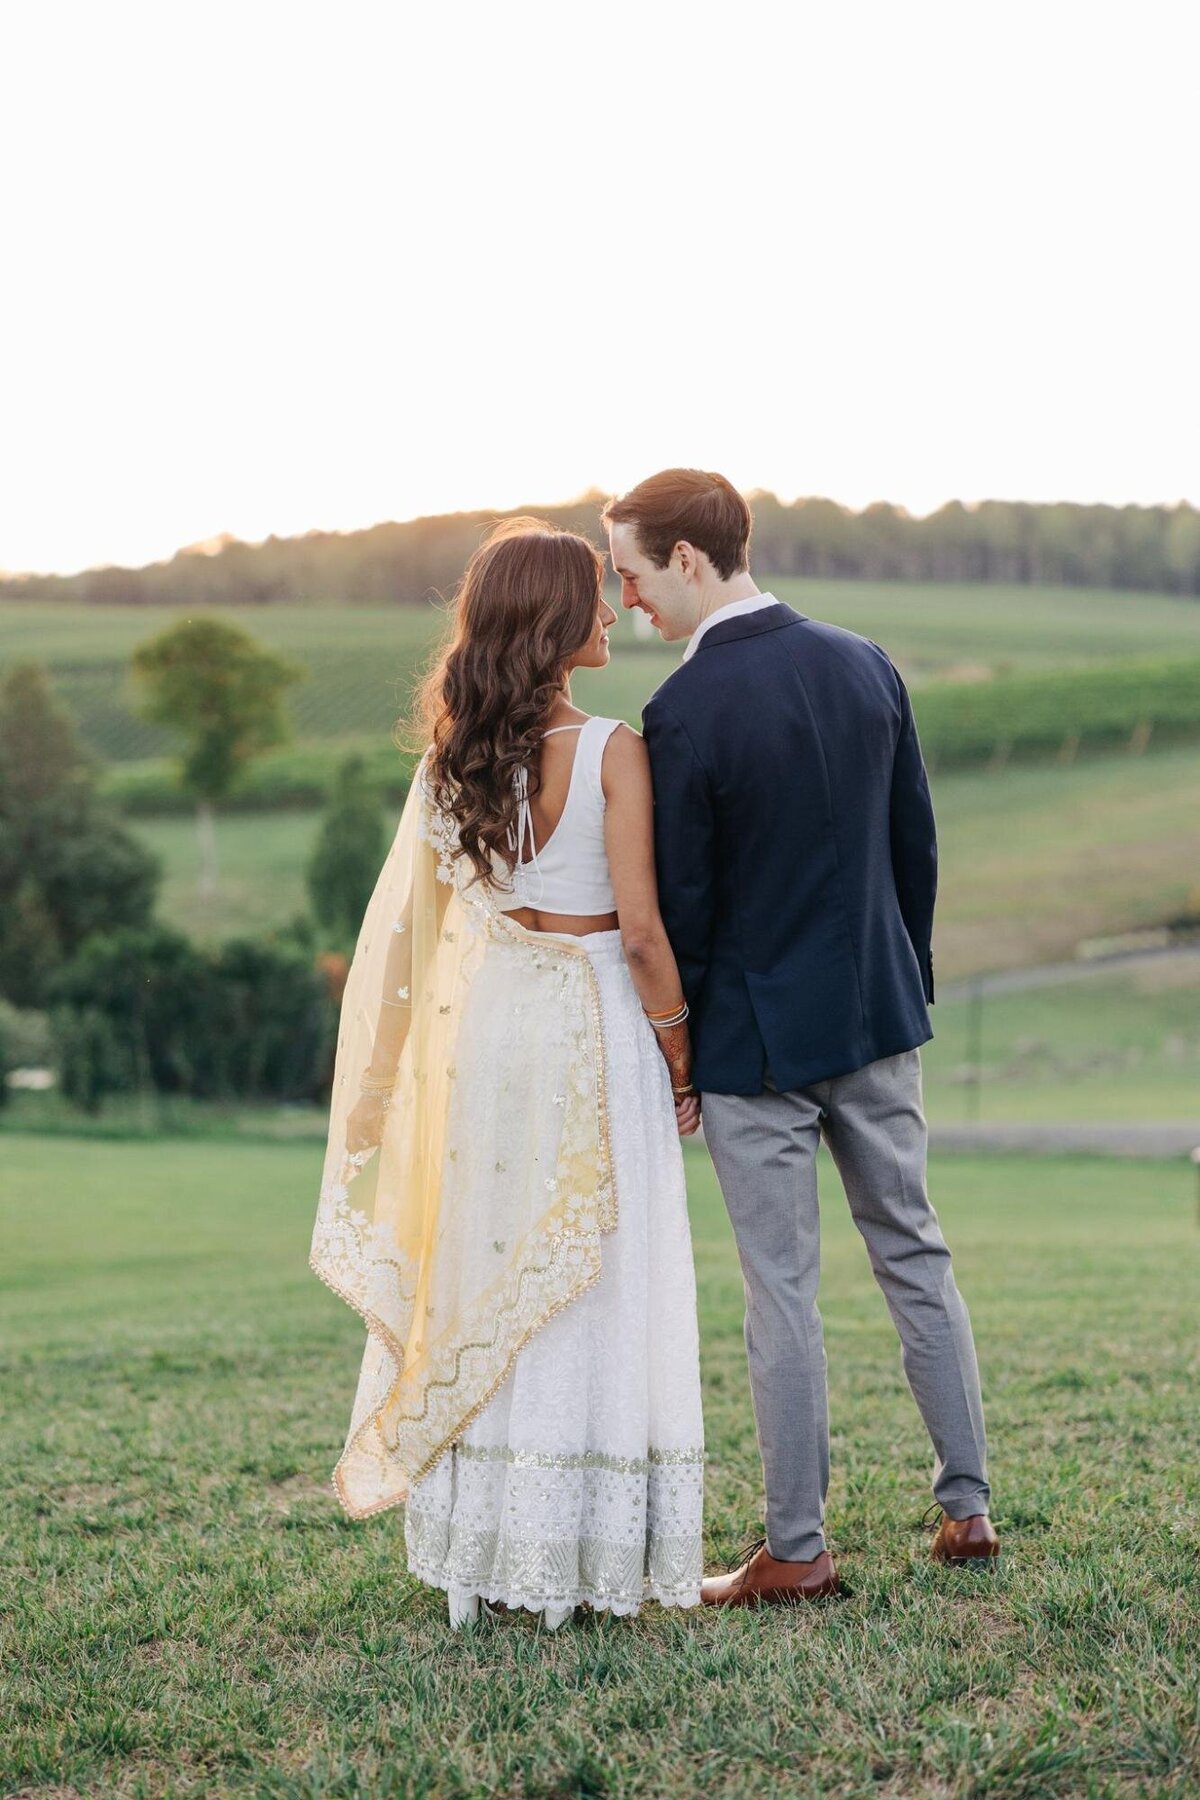 A bride and groom stand close together in a field, the bride in a white lace dress and the groom in a blue suit, facing a sunset.